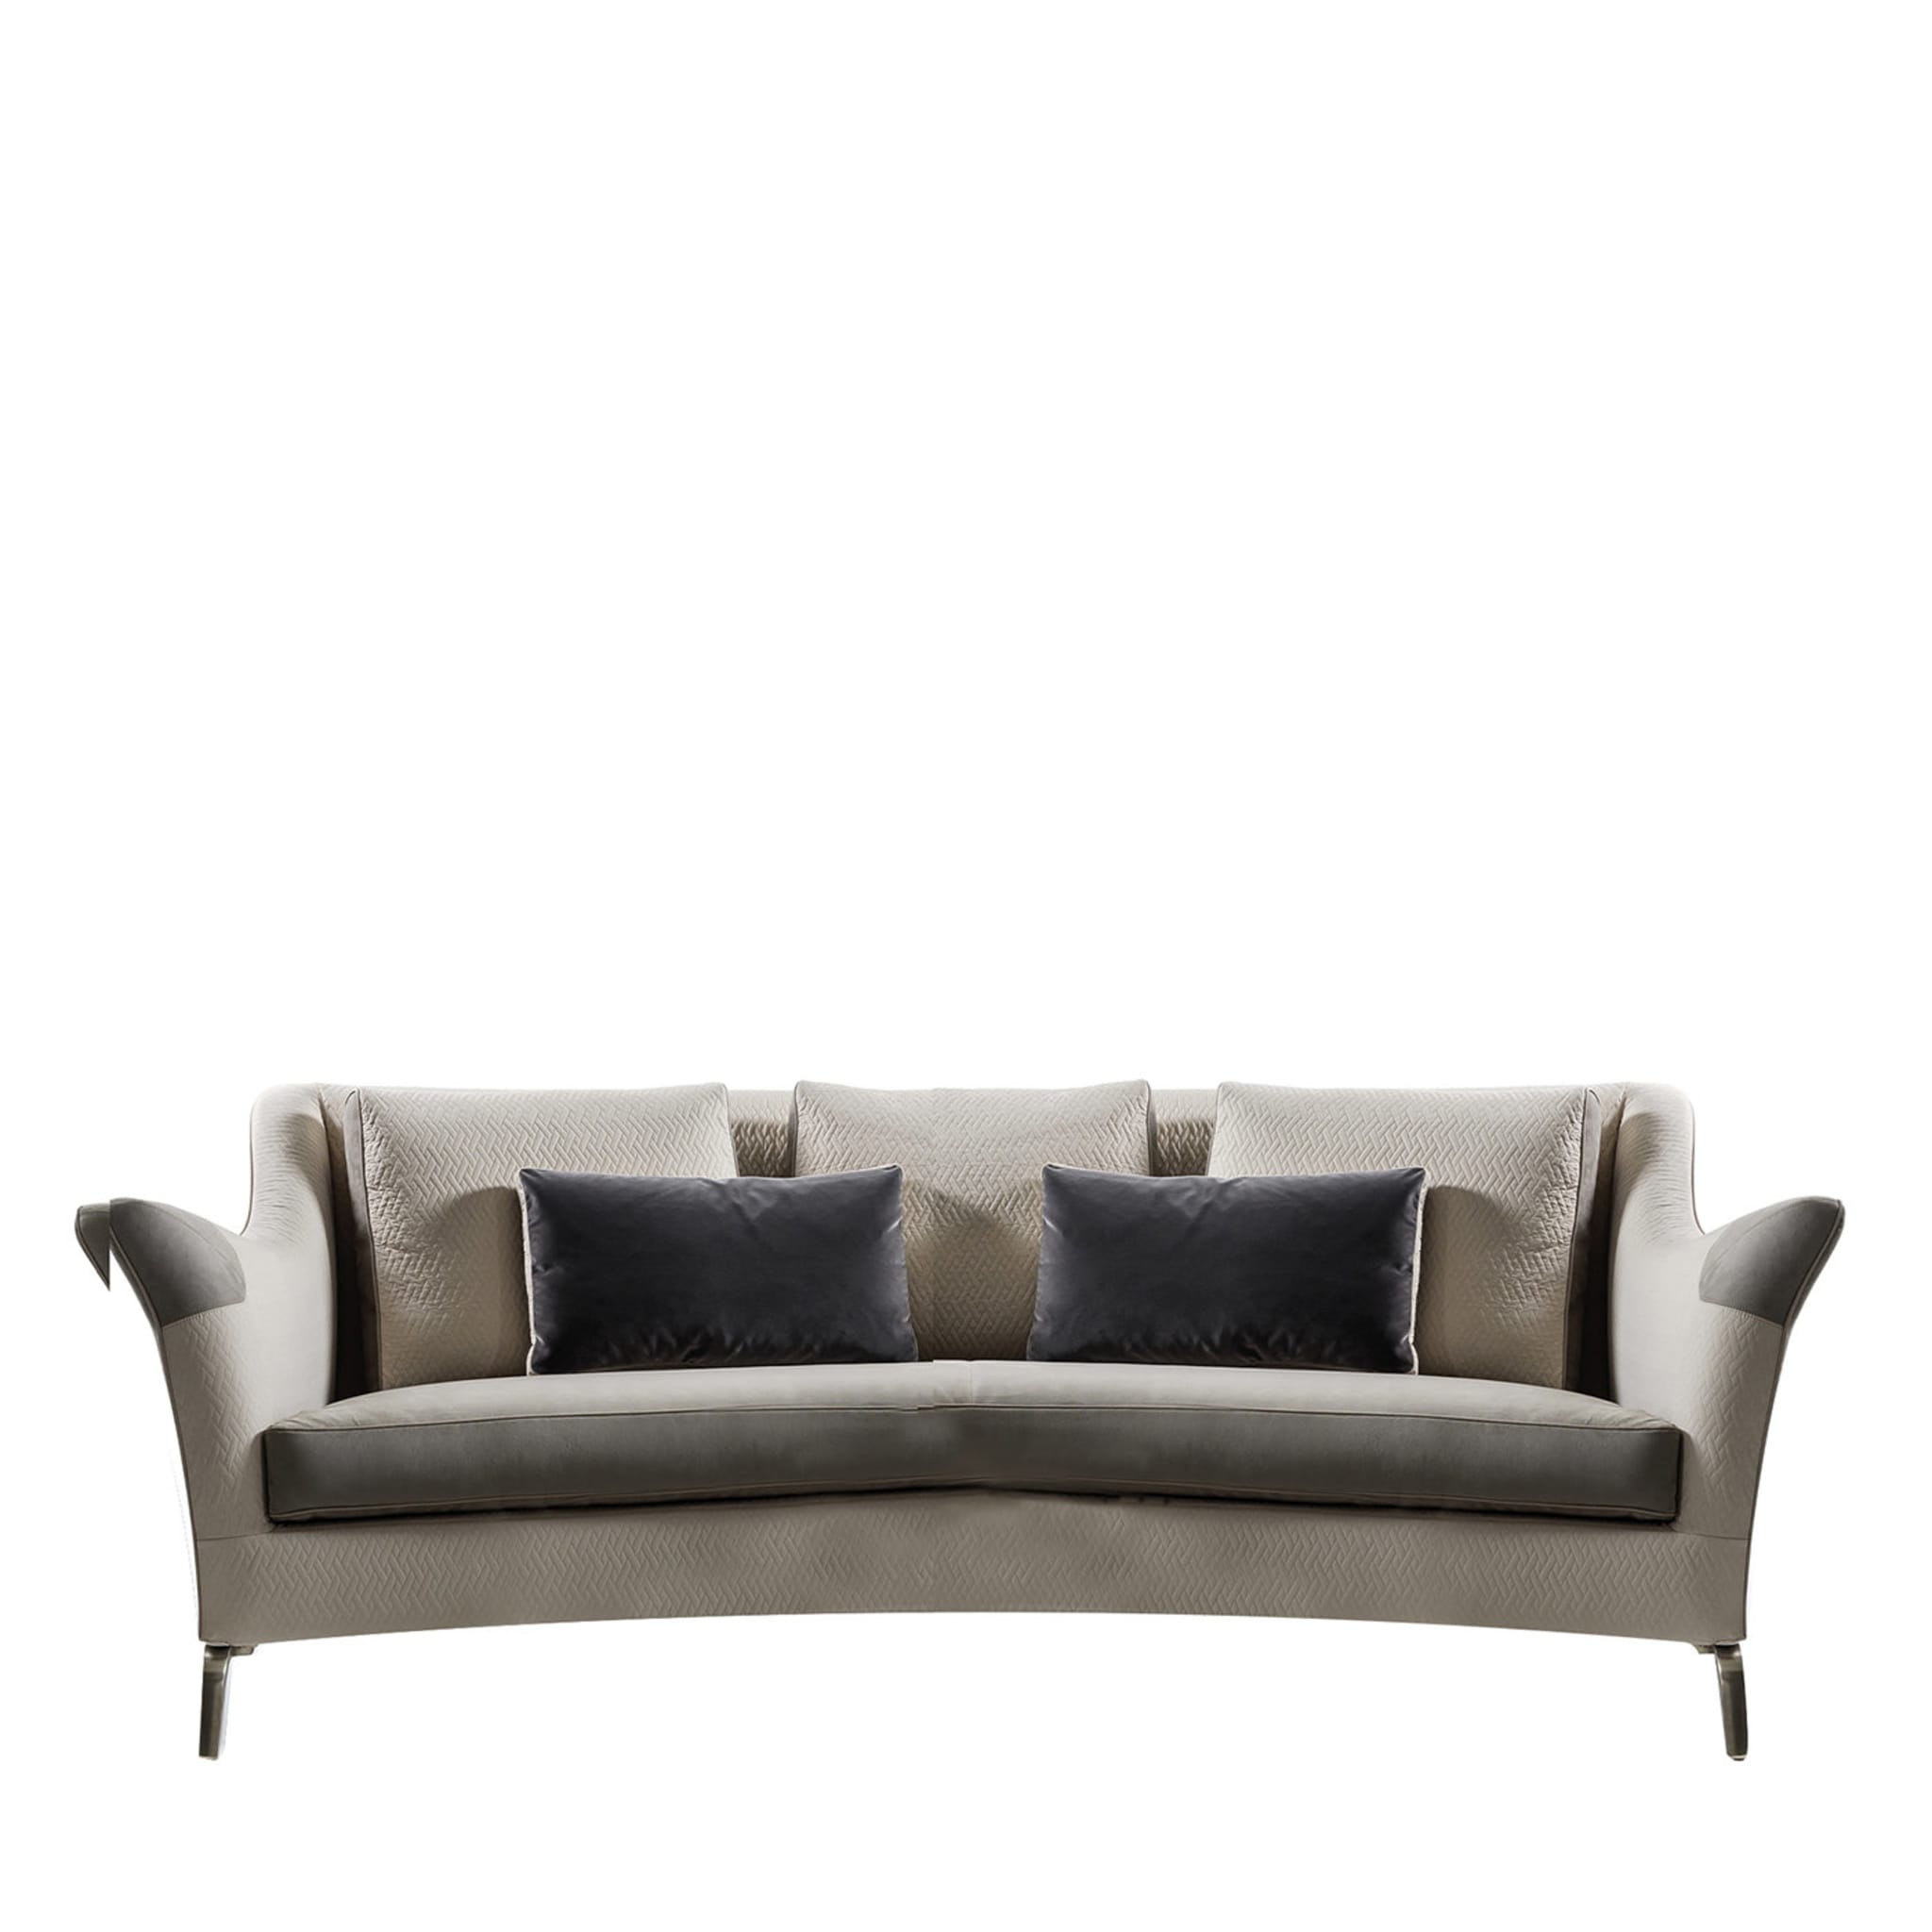 Patterned Beige and Taupe Sofa - Main view